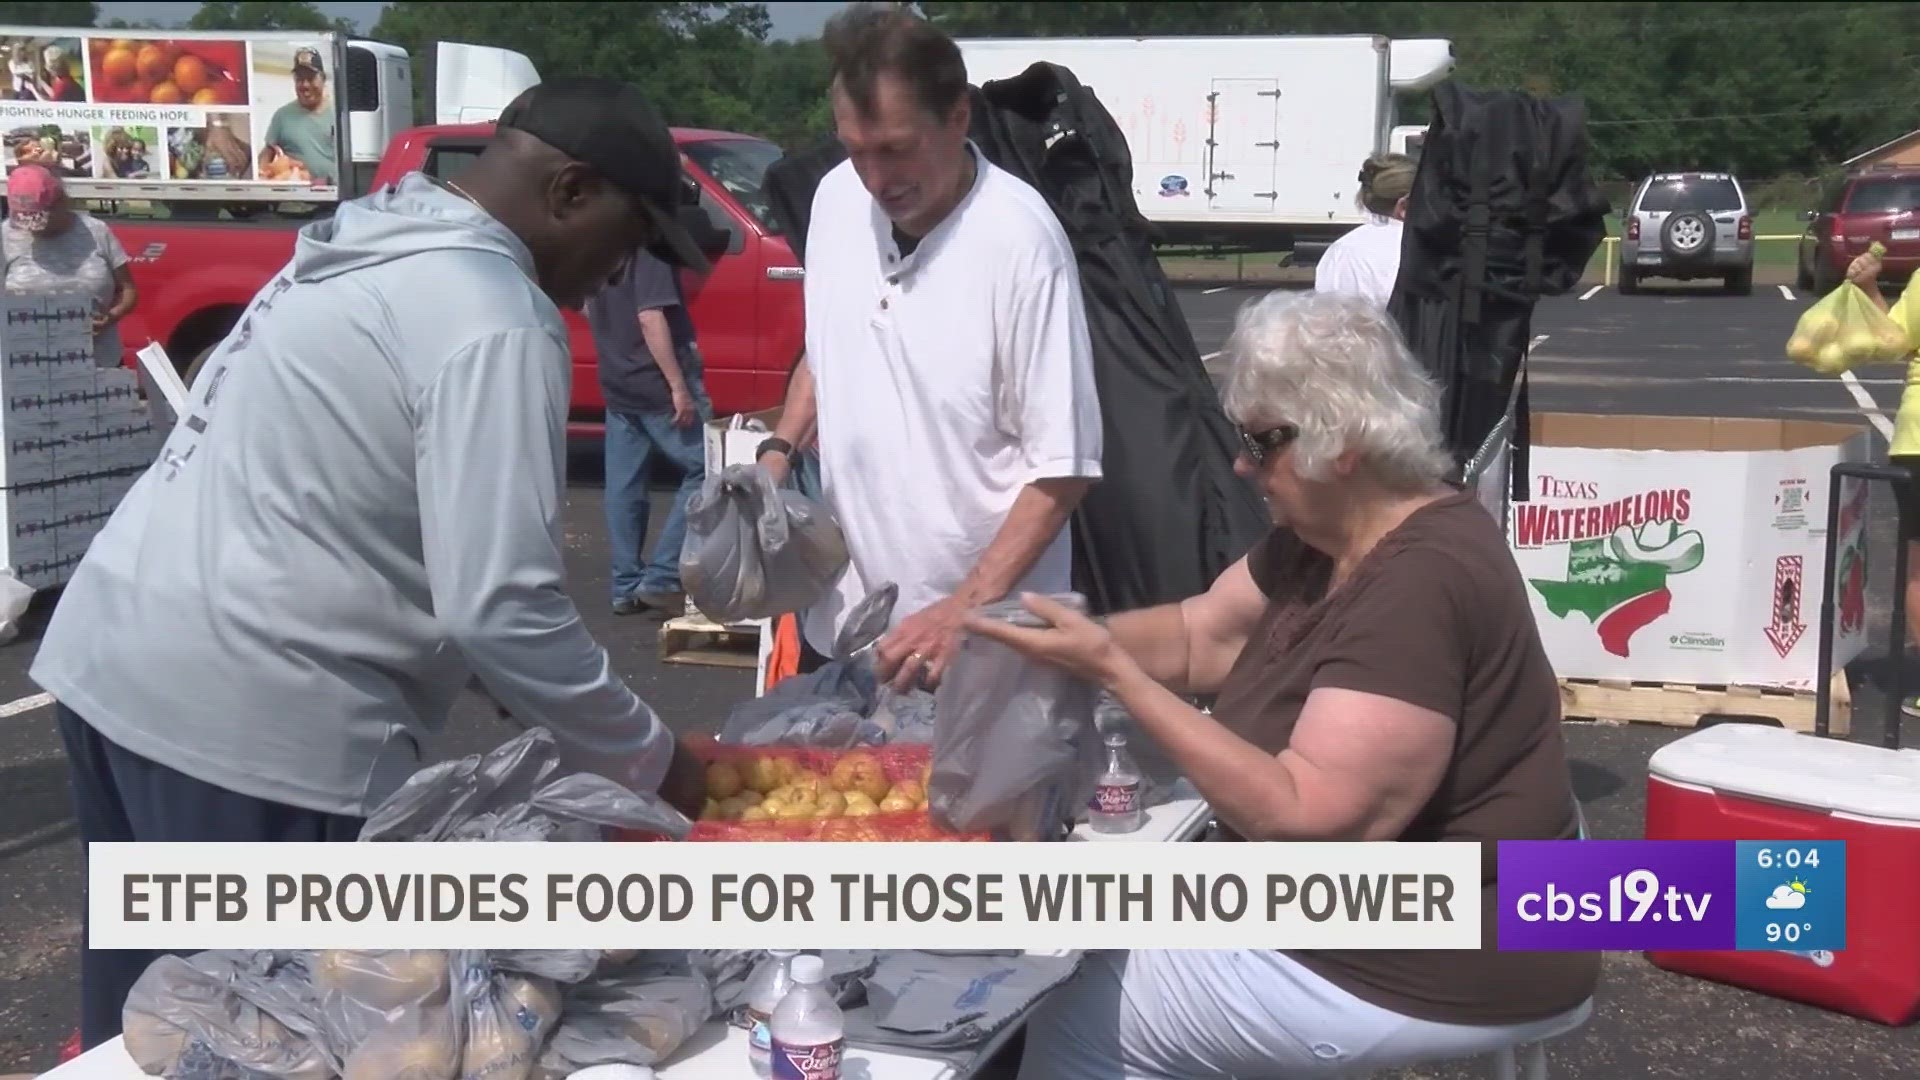 SNAP clients who lost food in power outages can get replacements cbs19.tv